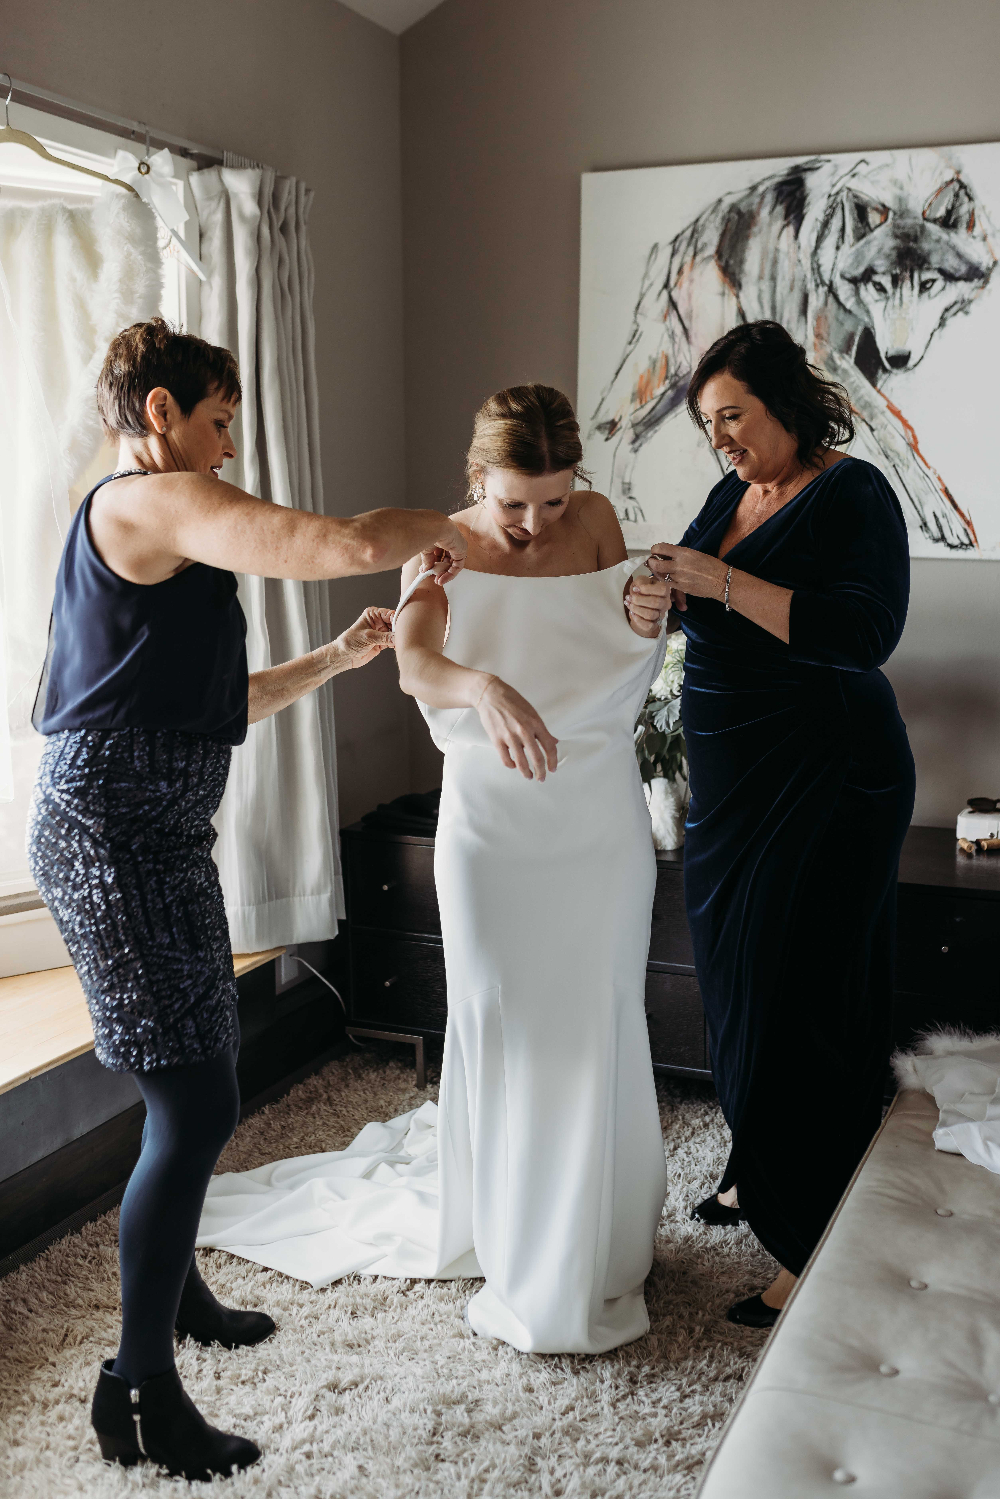 Moms helping bride with wedding dress